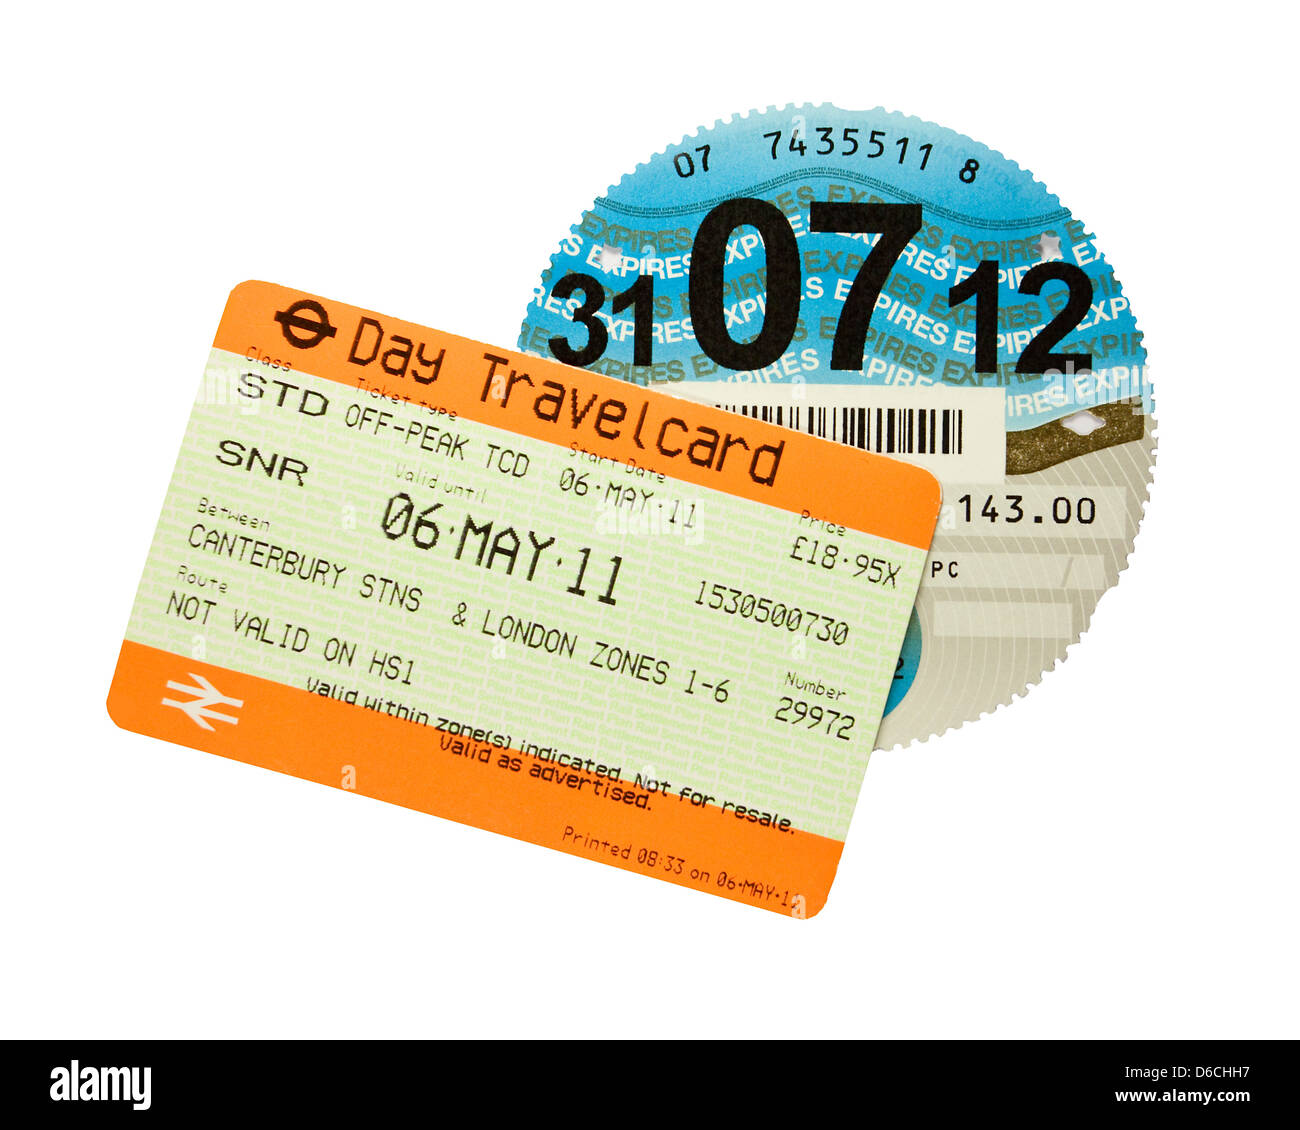 Take the Train or Drive Train Ticket and Tax Disc Stock Photo